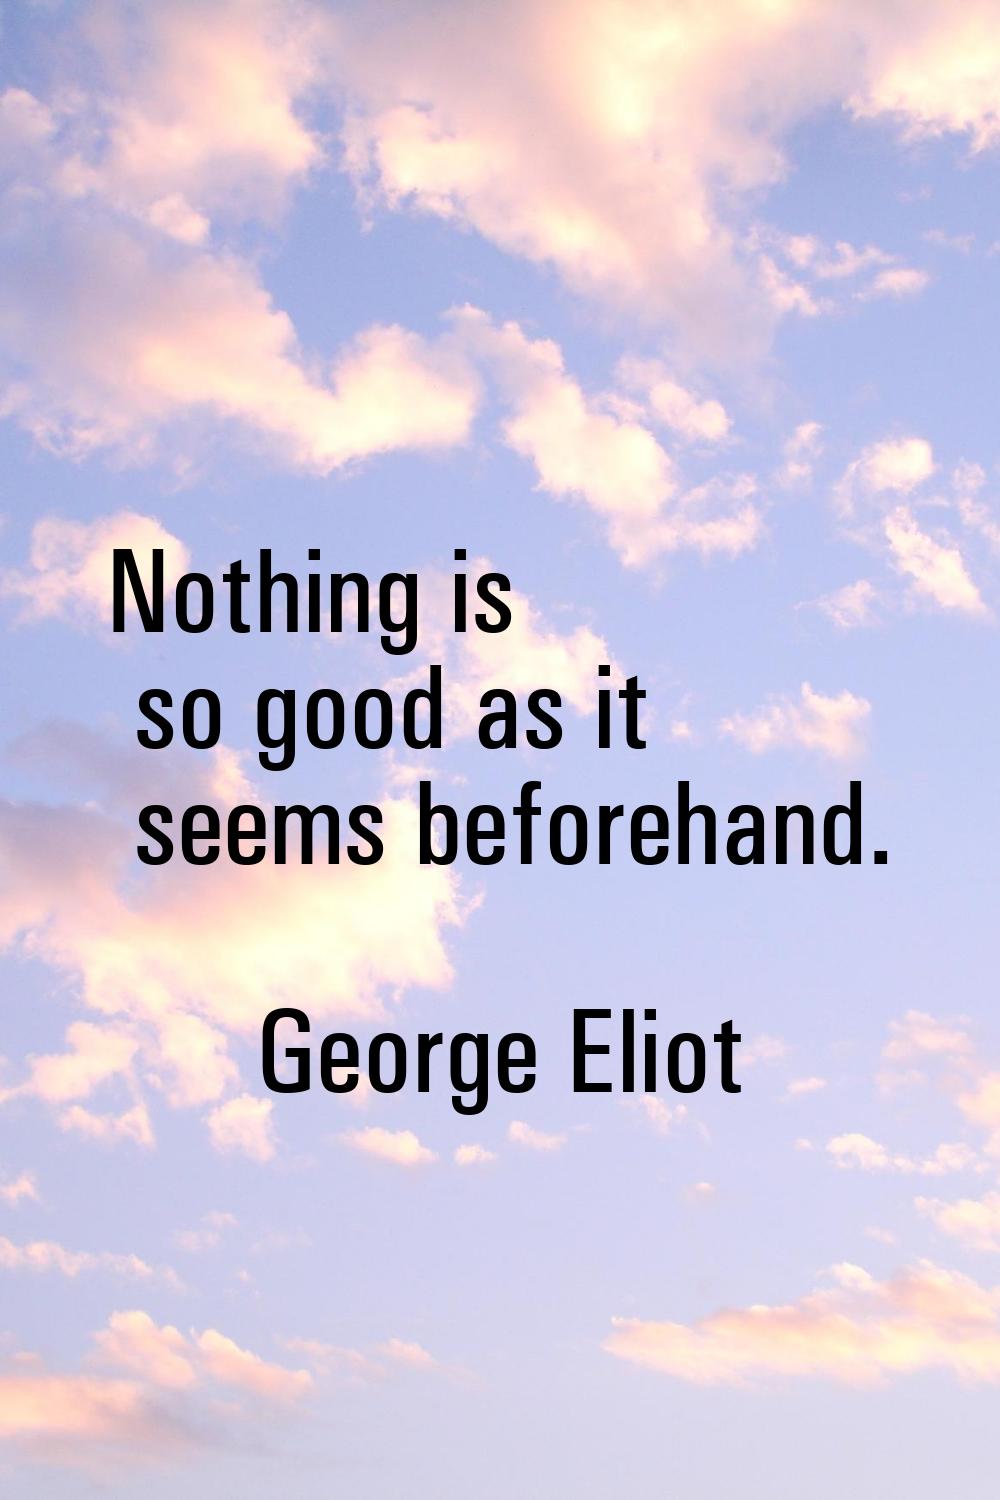 Nothing is so good as it seems beforehand.